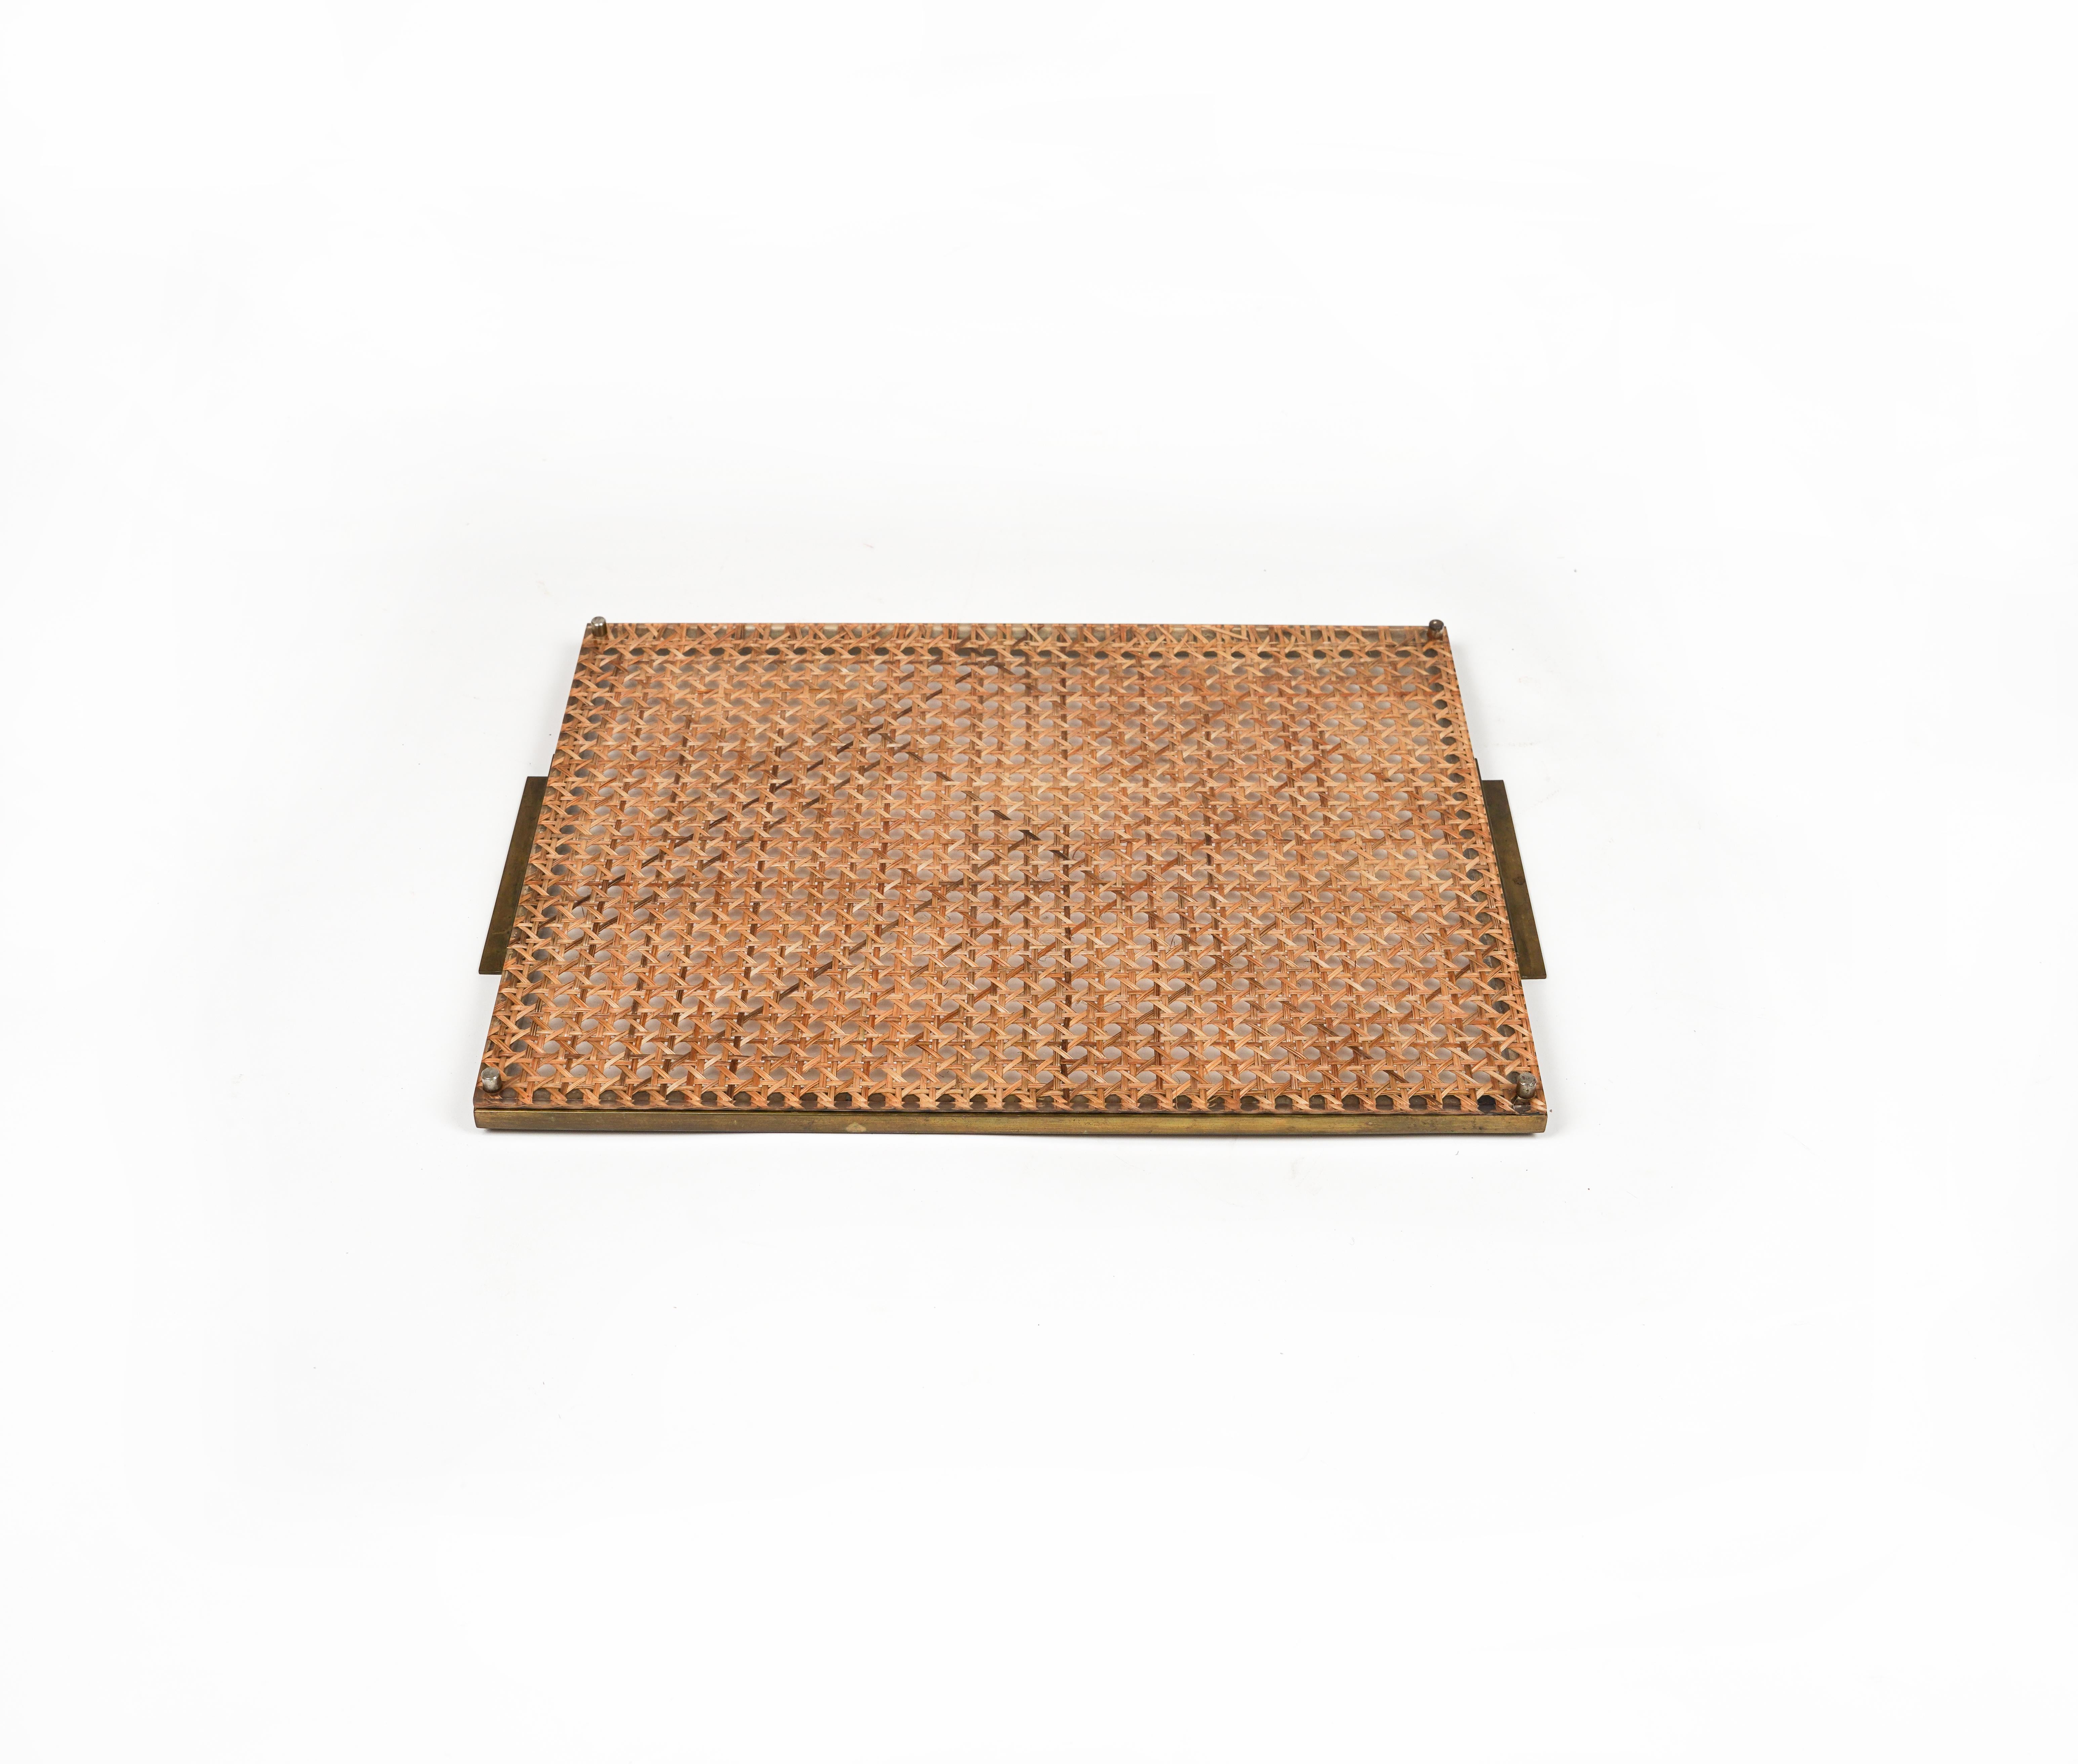 Serving Tray in Lucite, Rattan & Brass Christian Dior Style, Italy, 1970s For Sale 4